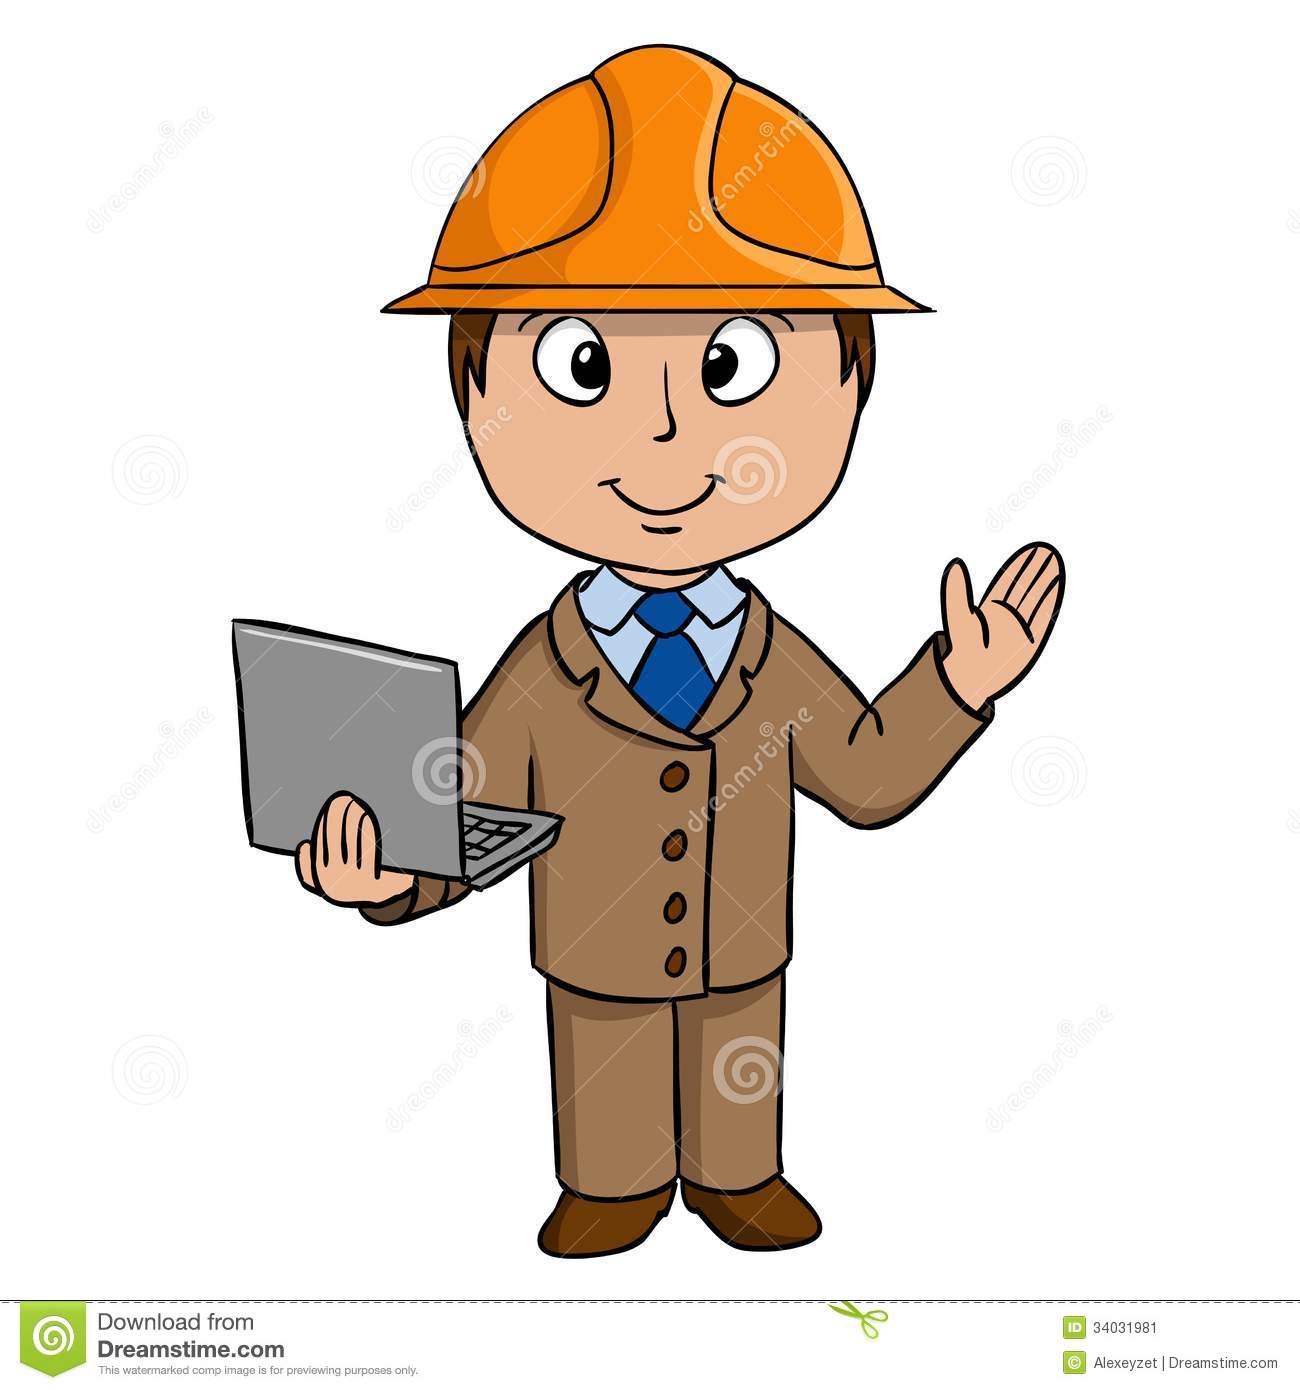 Engineer Clipart Images.